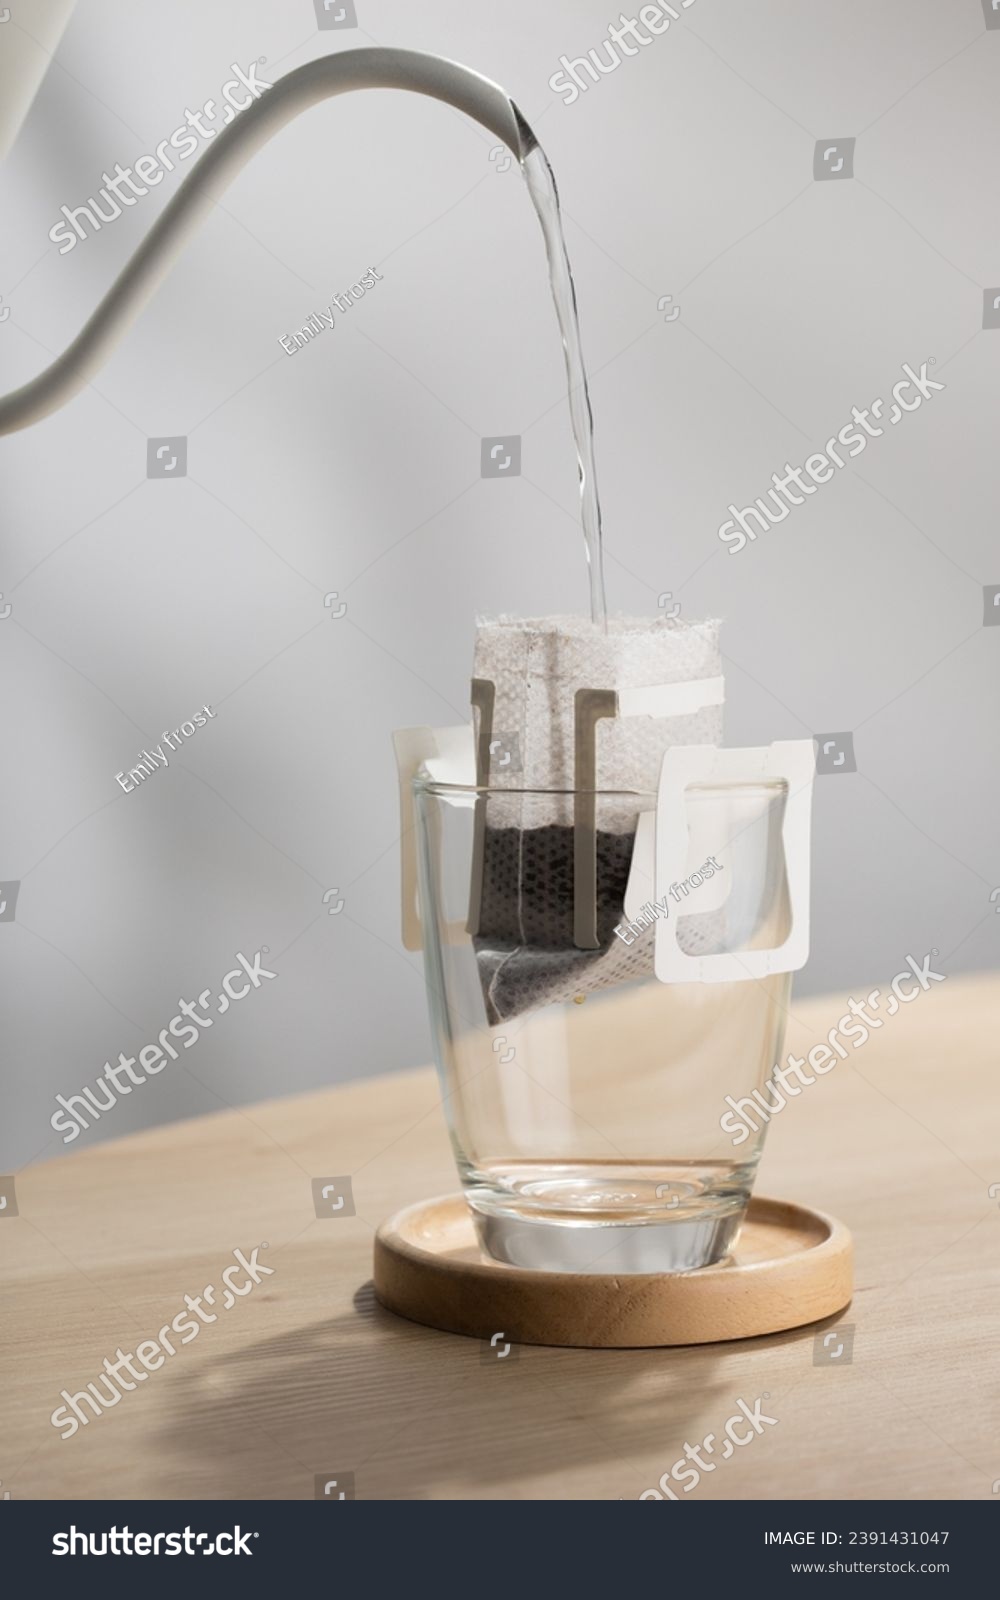 The hot water is poured over the roasted and ground coffee, in a filter paper ready to use. #2391431047